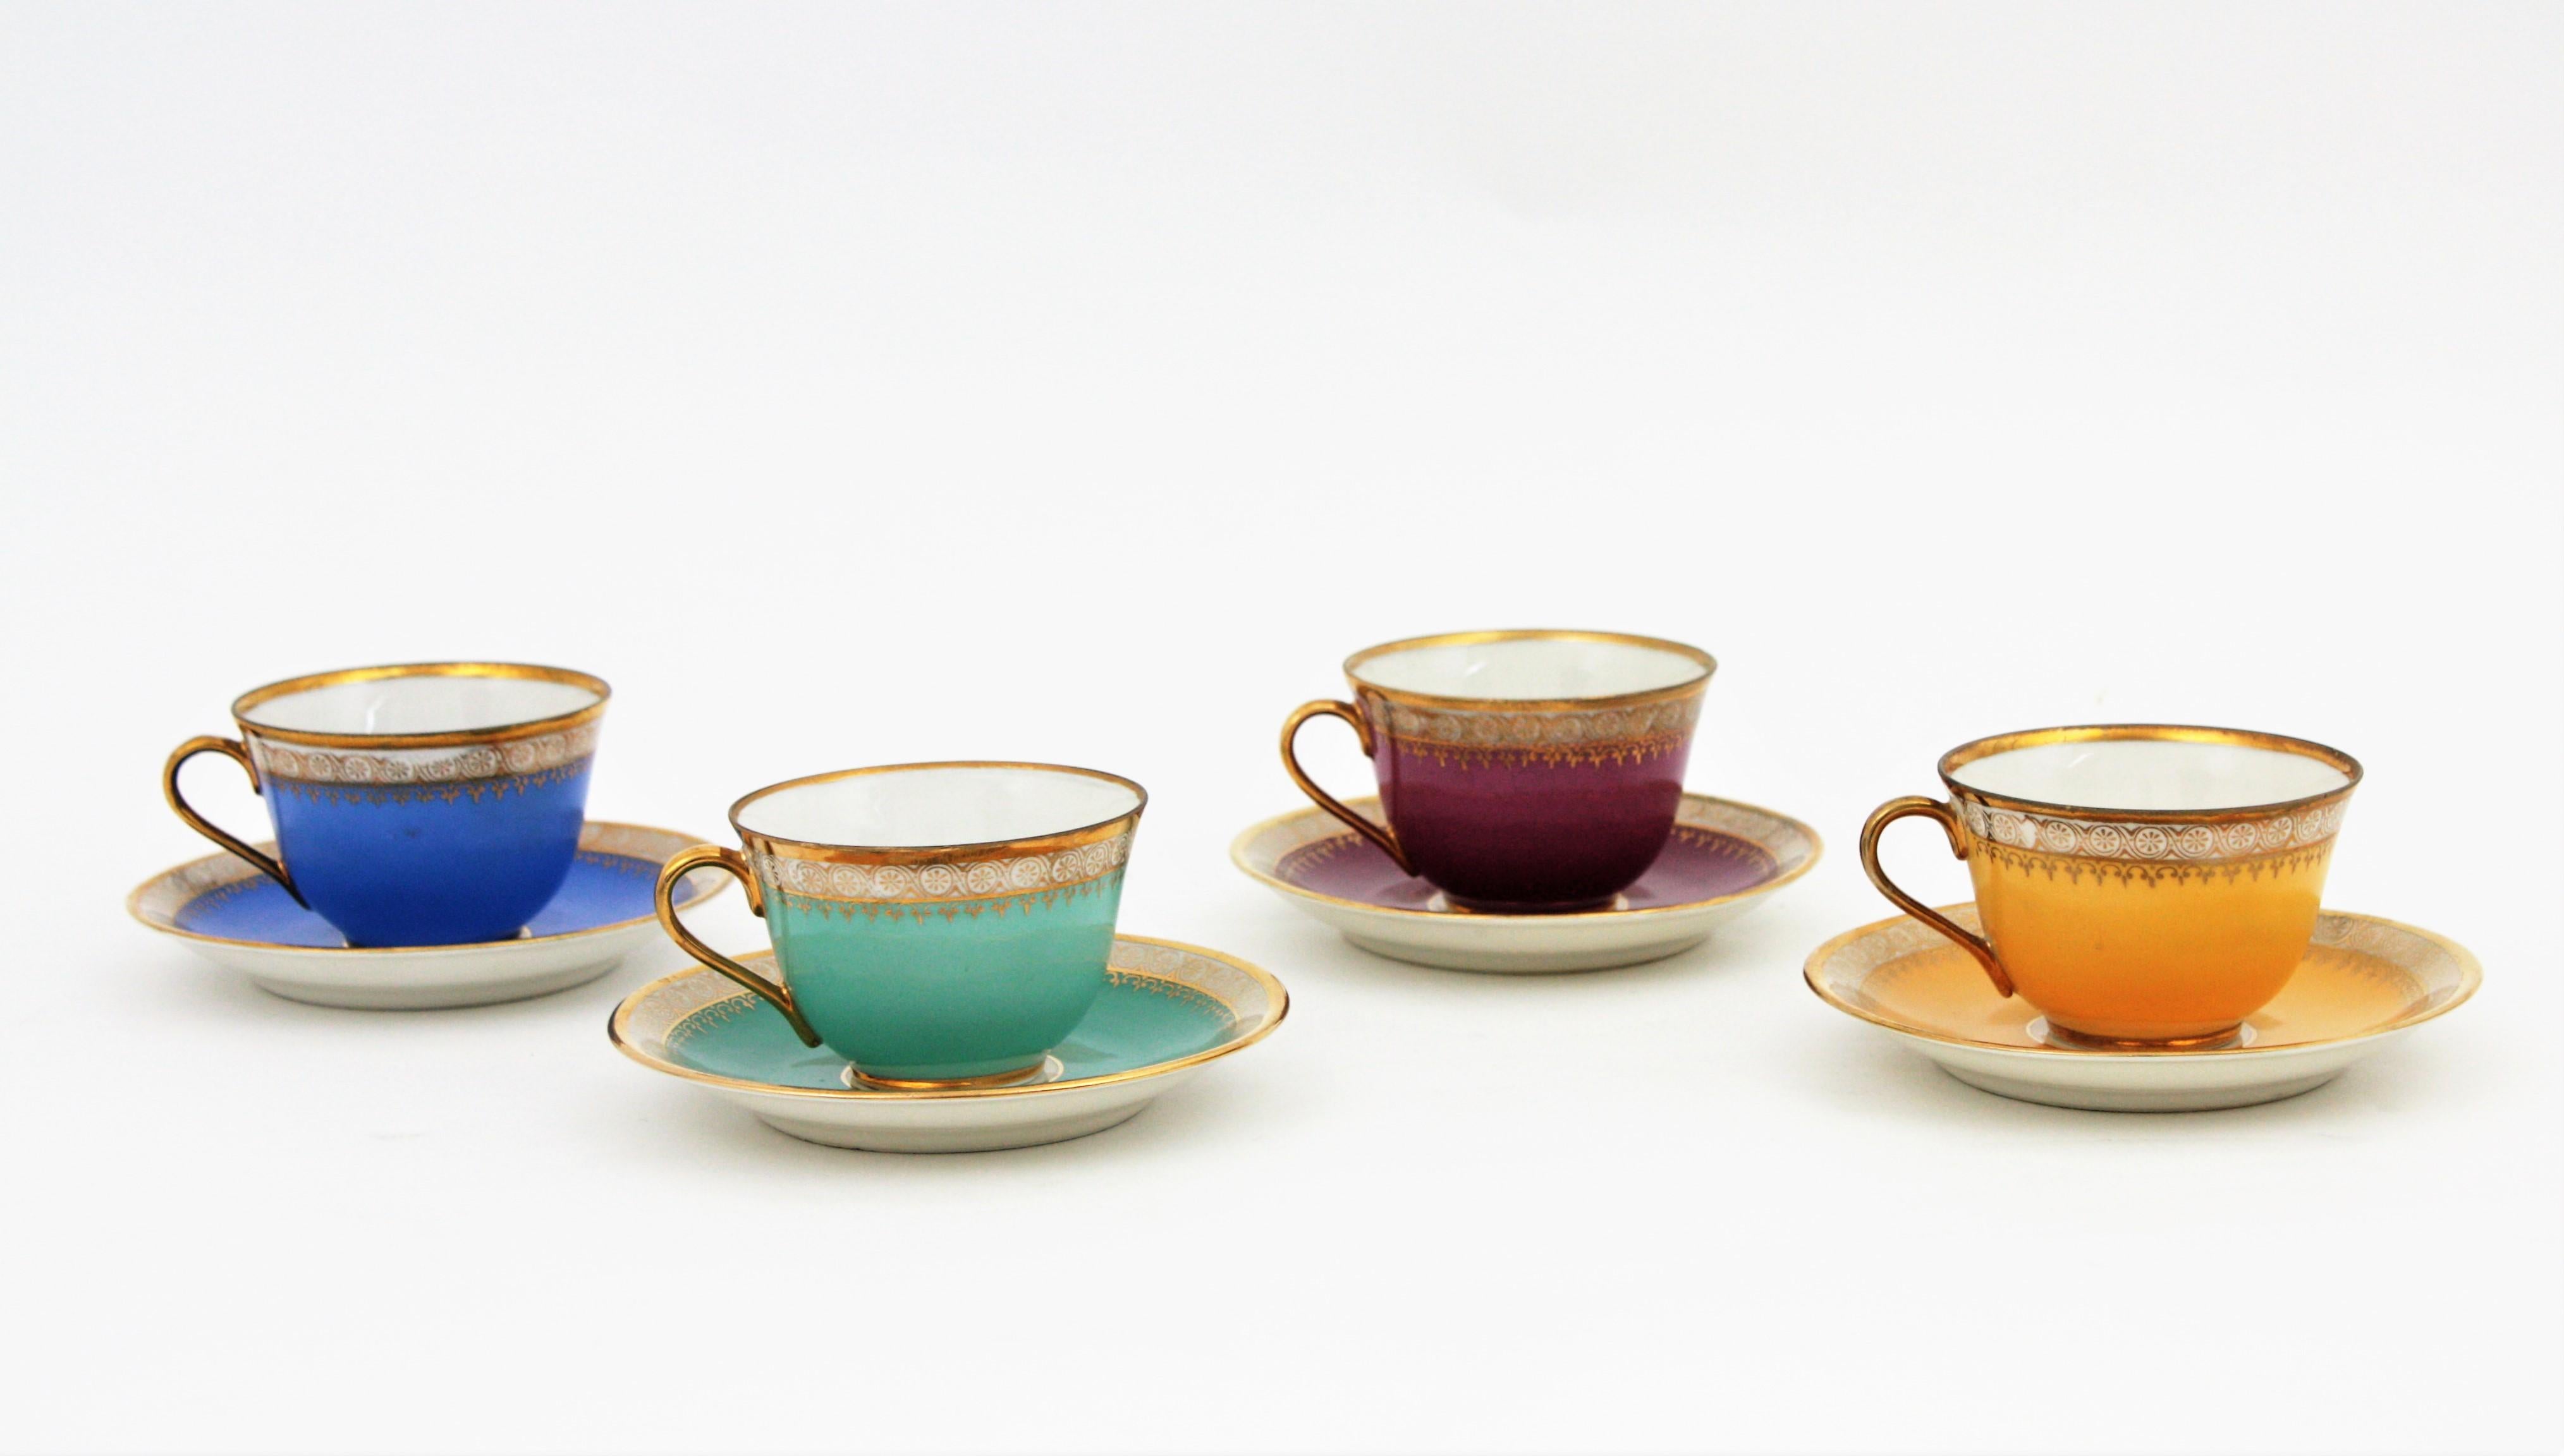 An elegant and colorful porcelain gold rimmed demitasse coffee or tea service for four, Spain, 1950s
Eye-catching multicolor glazed porcelain coffee set. All pieces have the same type of decoration with plain backgrounds in different colors